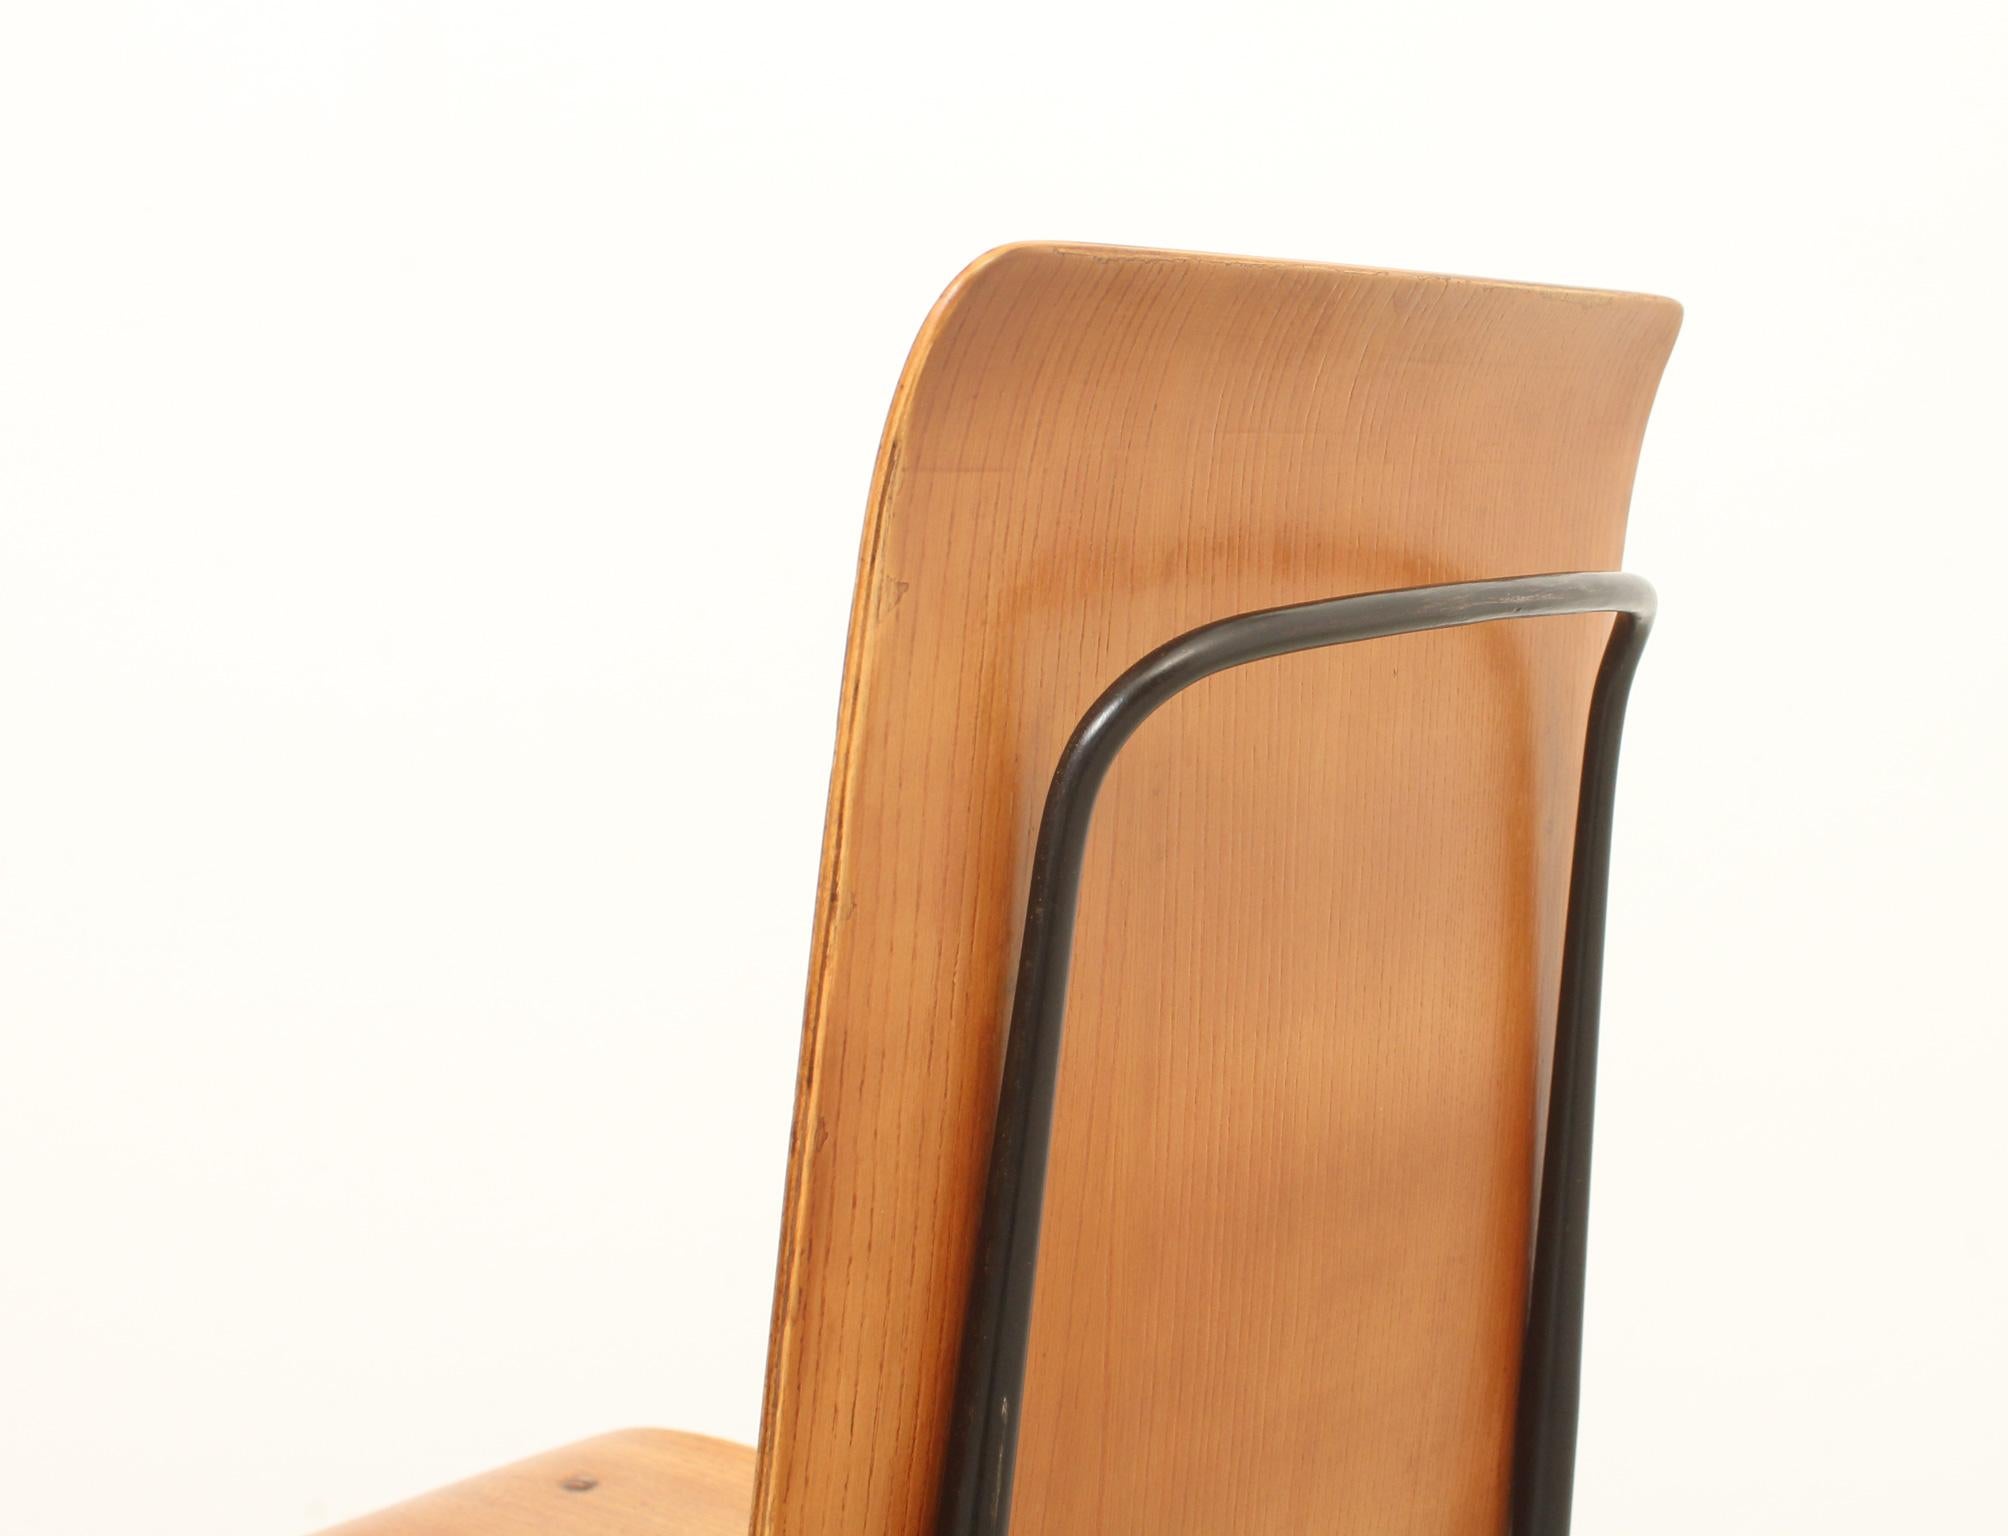 Mid-20th Century Plywood Dining Chairs by Carlo Ratti, Italy, 1950s For Sale